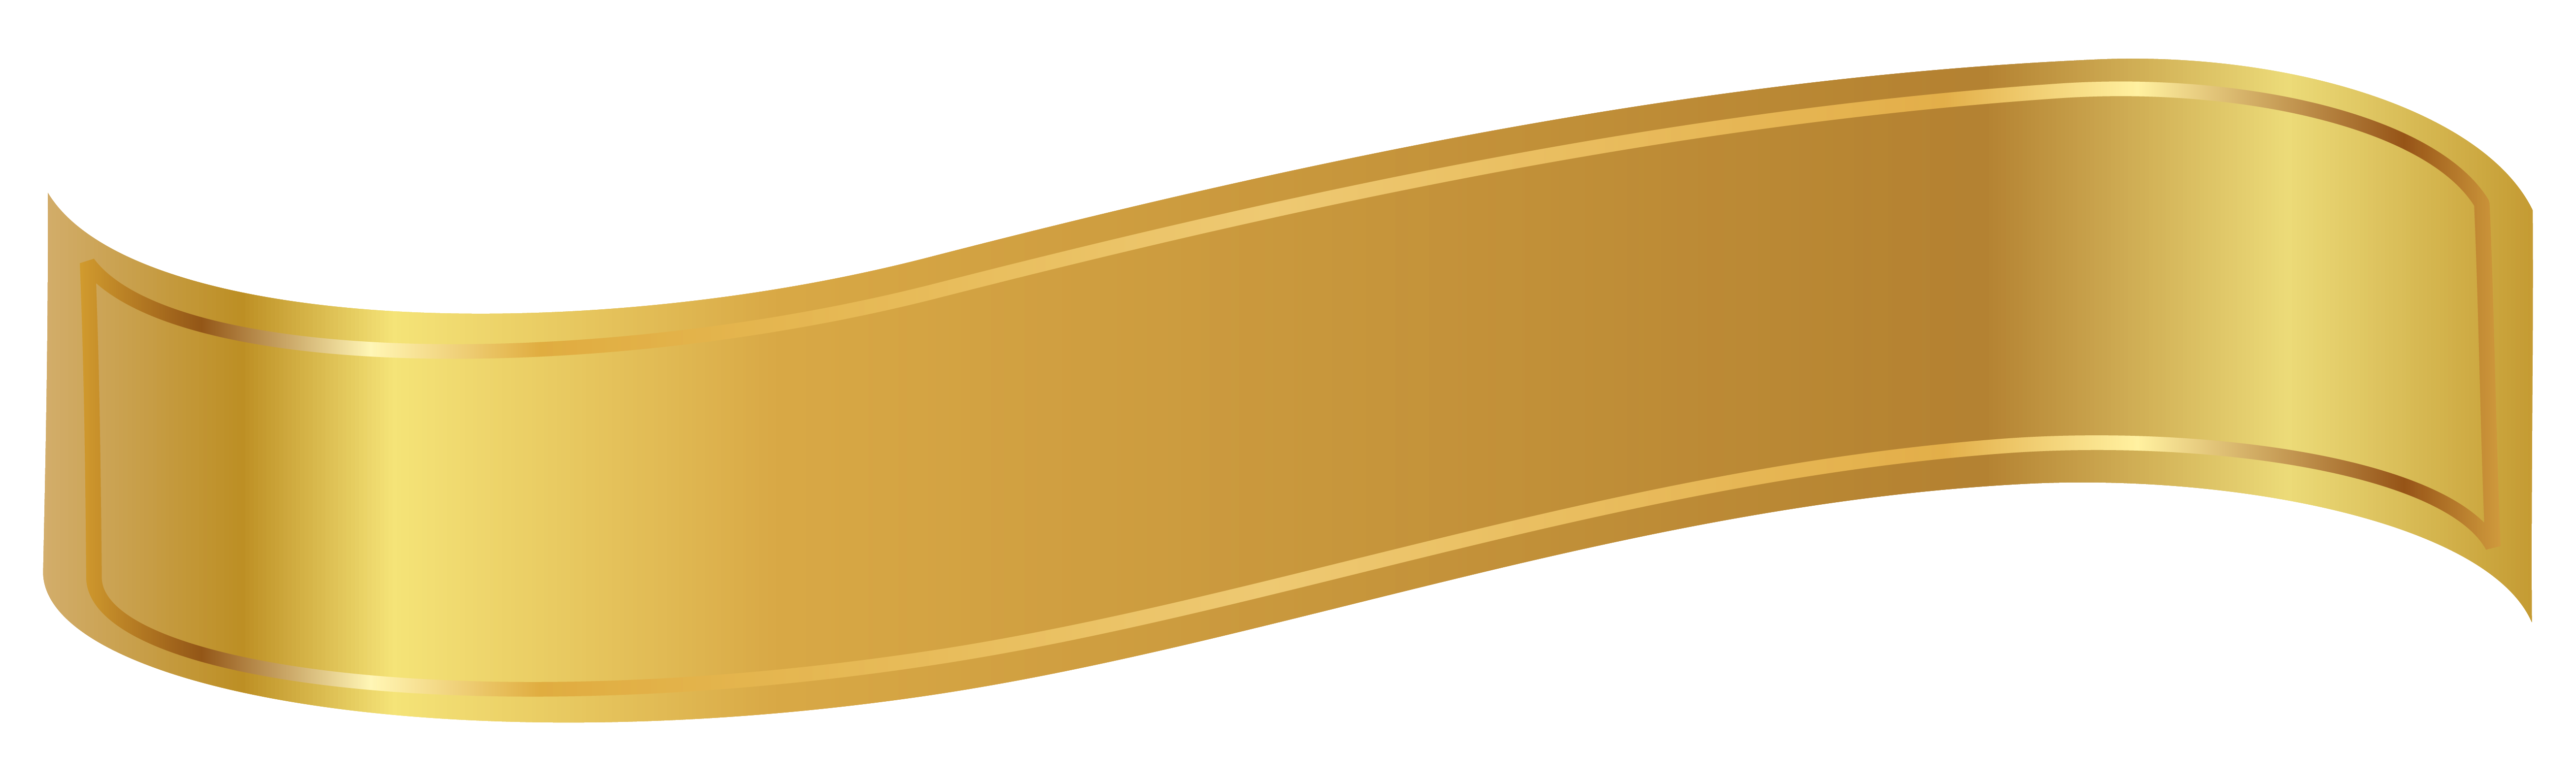 Gold Banner PNG Clipart Image 